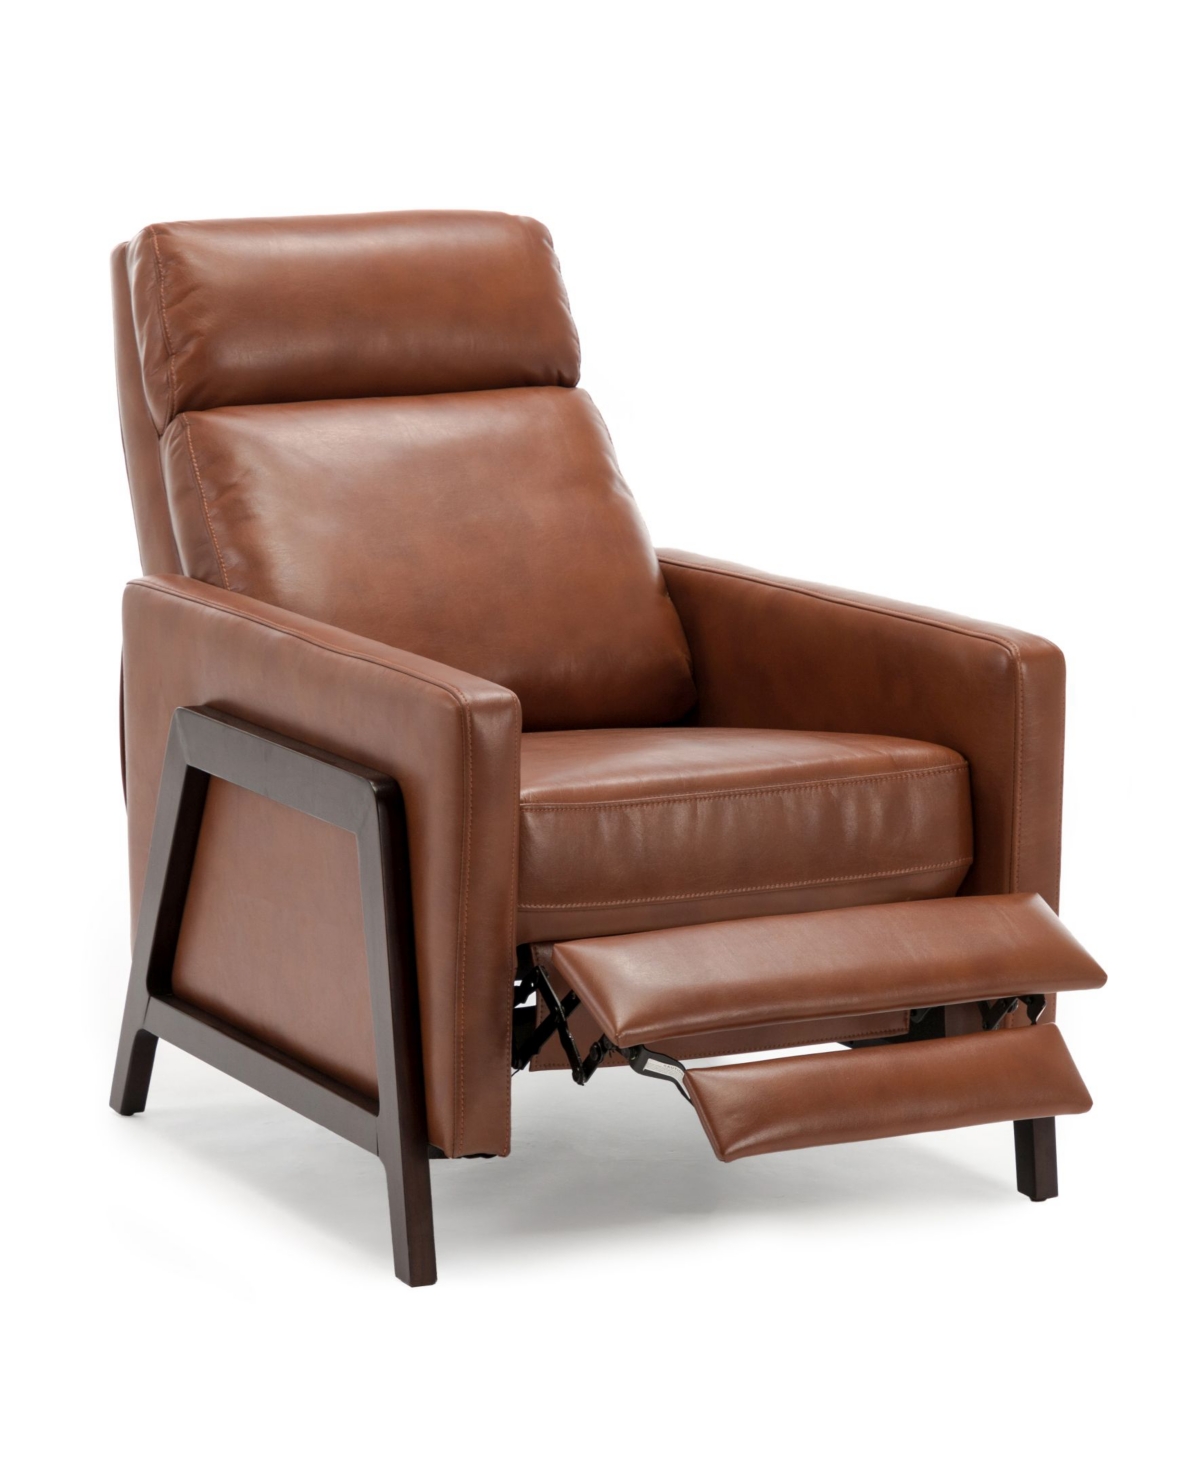 Comfort Pointe Maxton Push Back Recliner In Rust